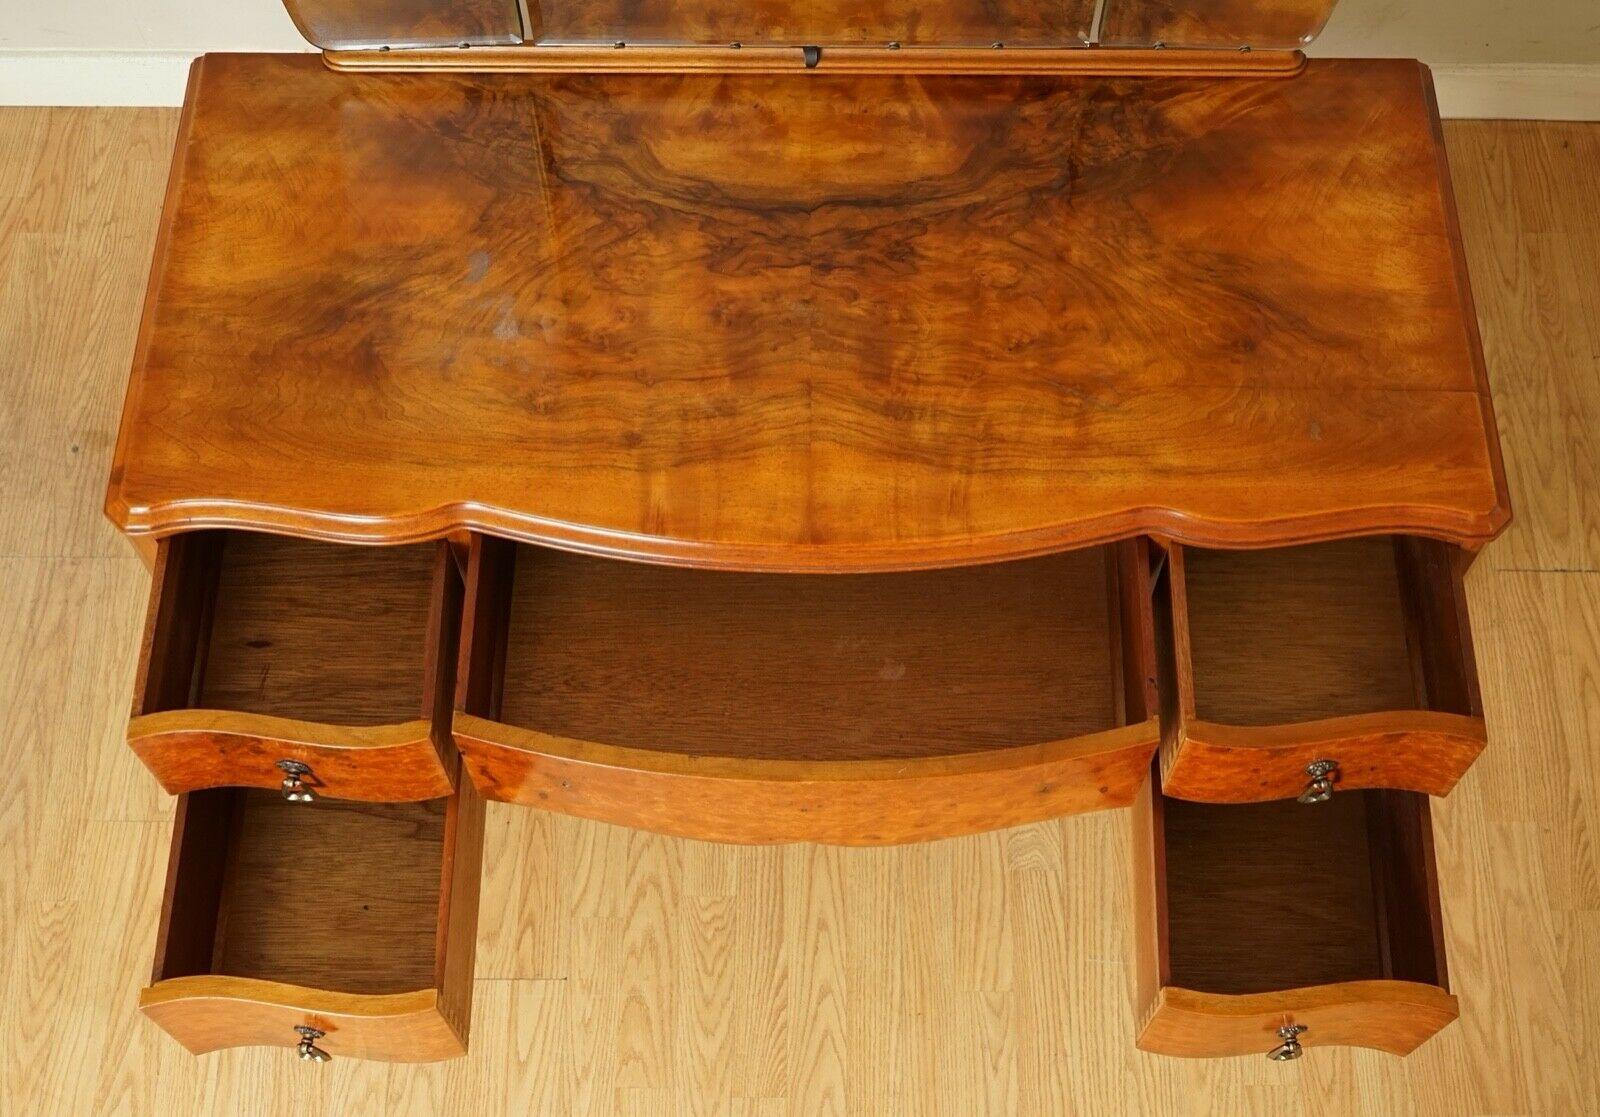 Stunning Vintage Art Deco Burr Walnut Dressing Table with Queen Anne Legs 1